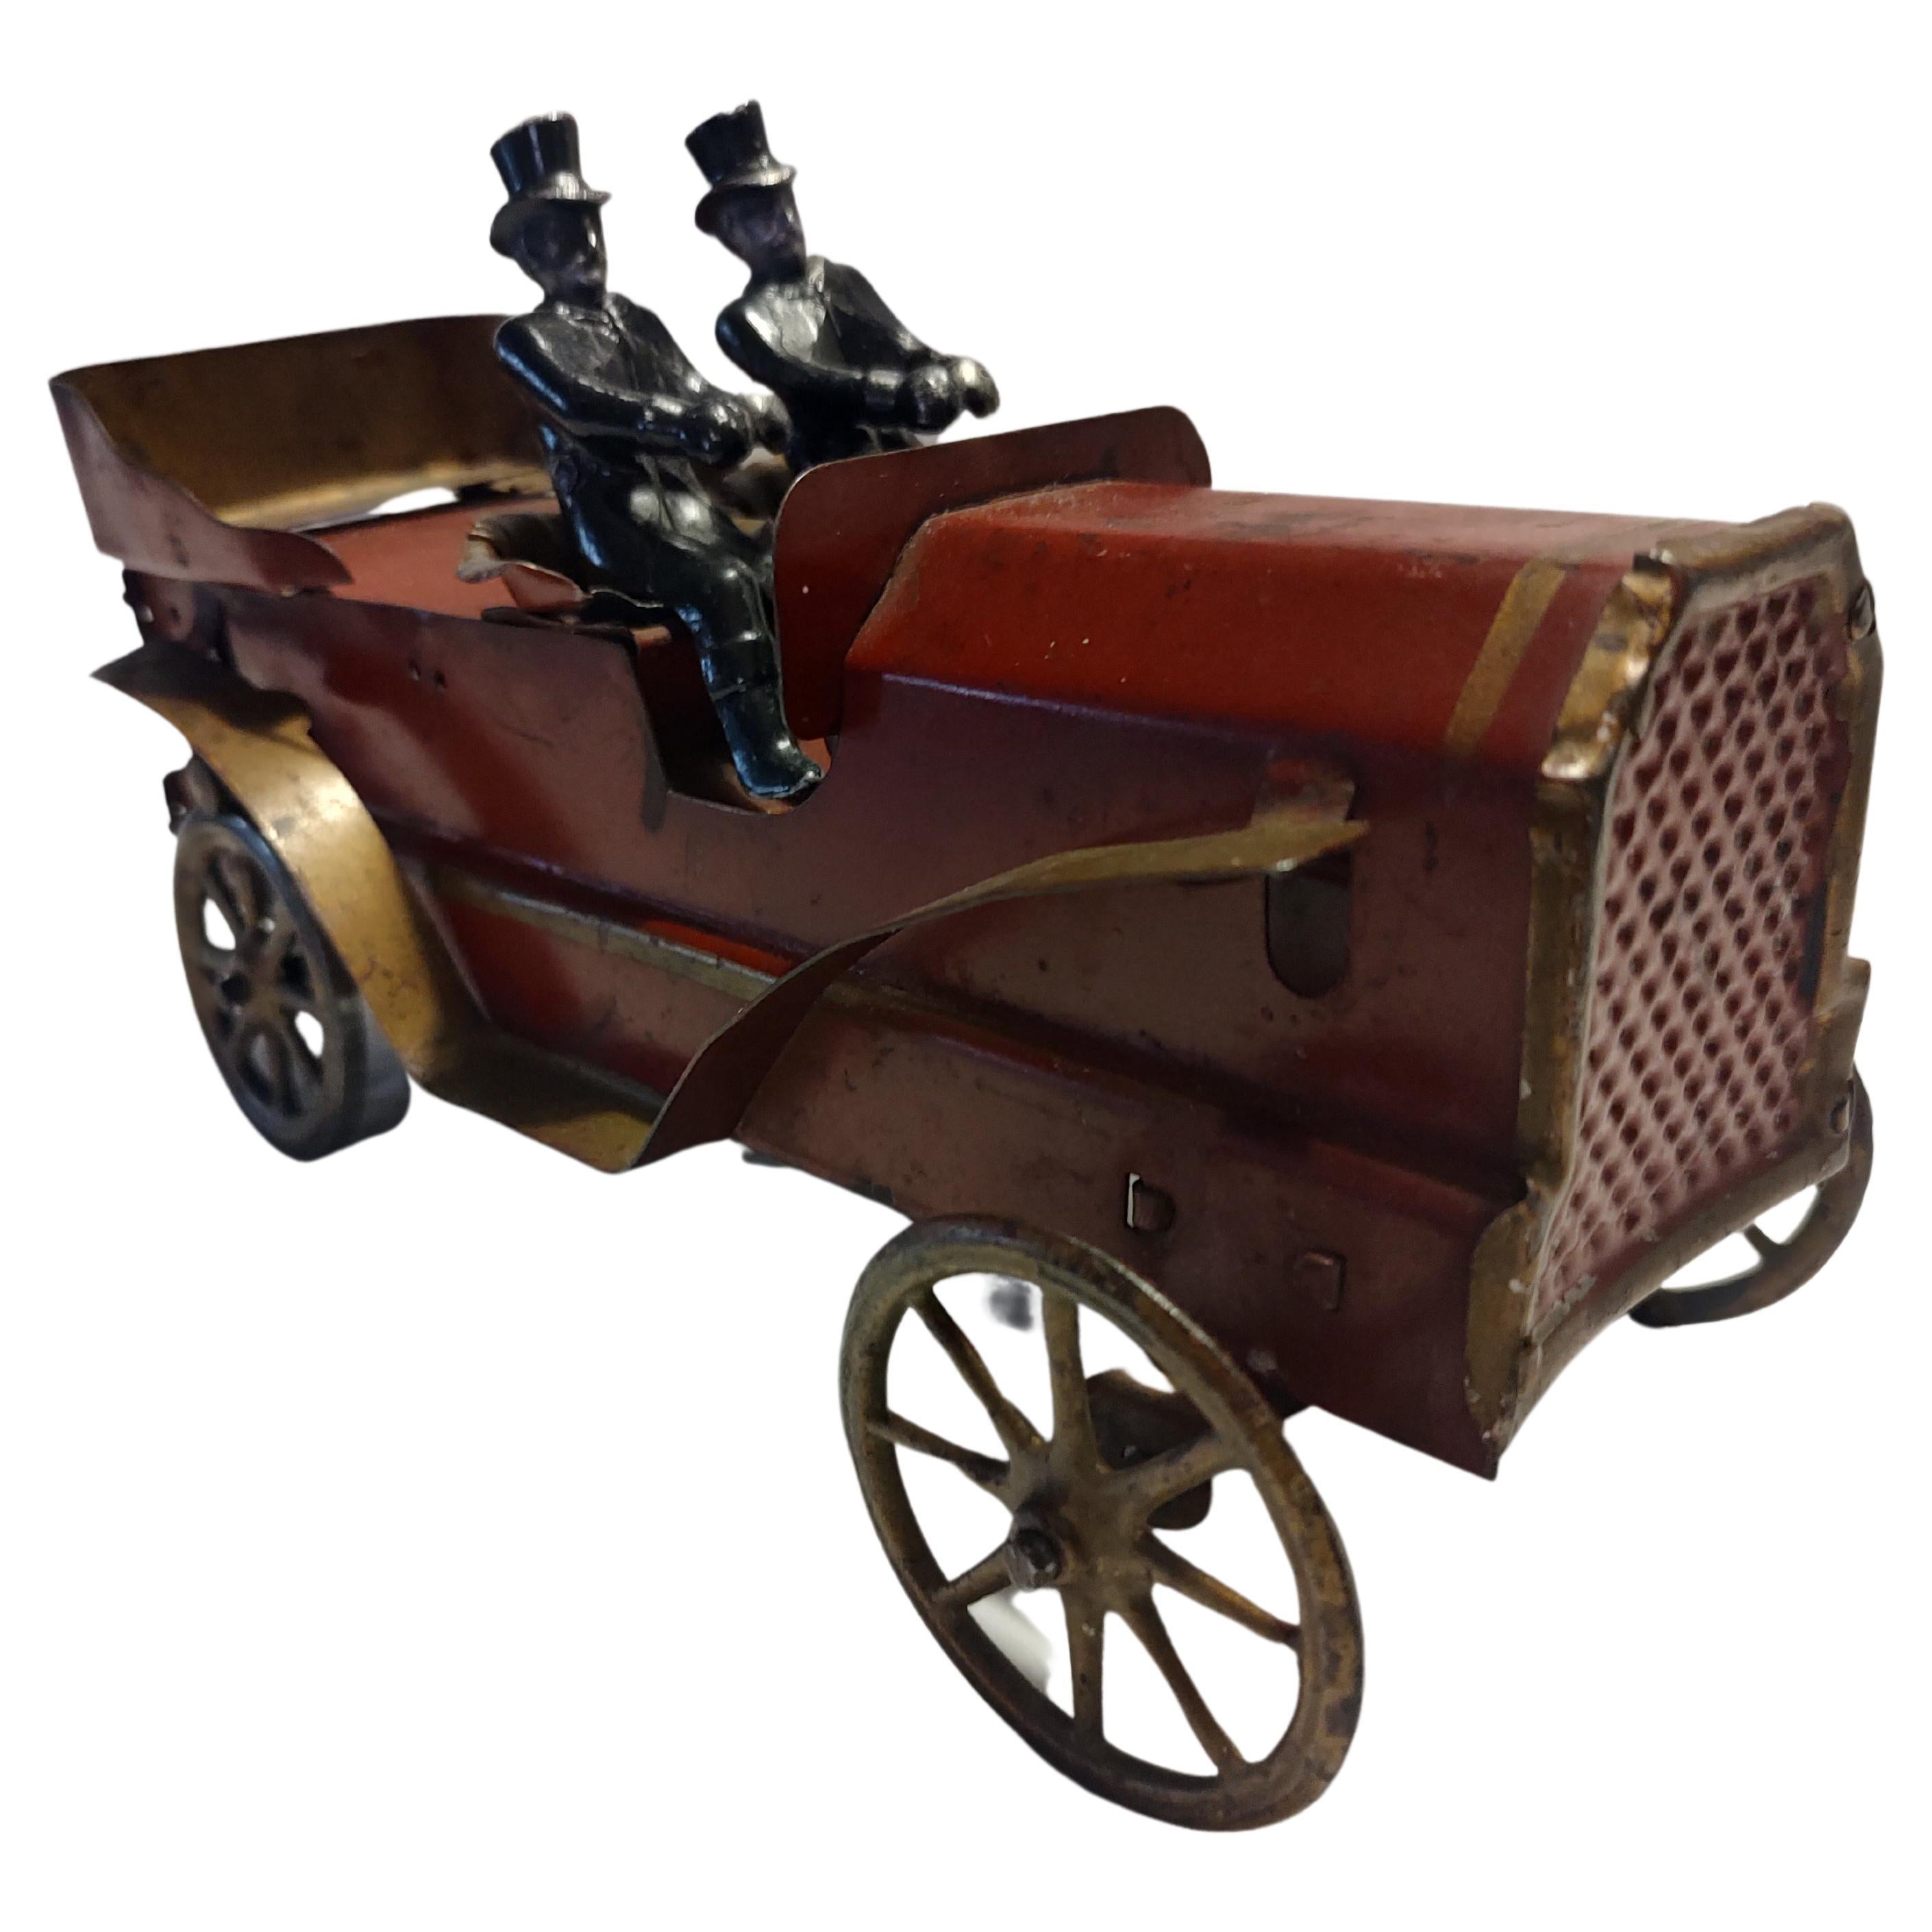 Fabulous example of a dayton hill climber open touring car from the early part of the 20th century.
In excellent antique condition with age appropriate wear. Two cast iron figures included. Still functions well as a hill climber.